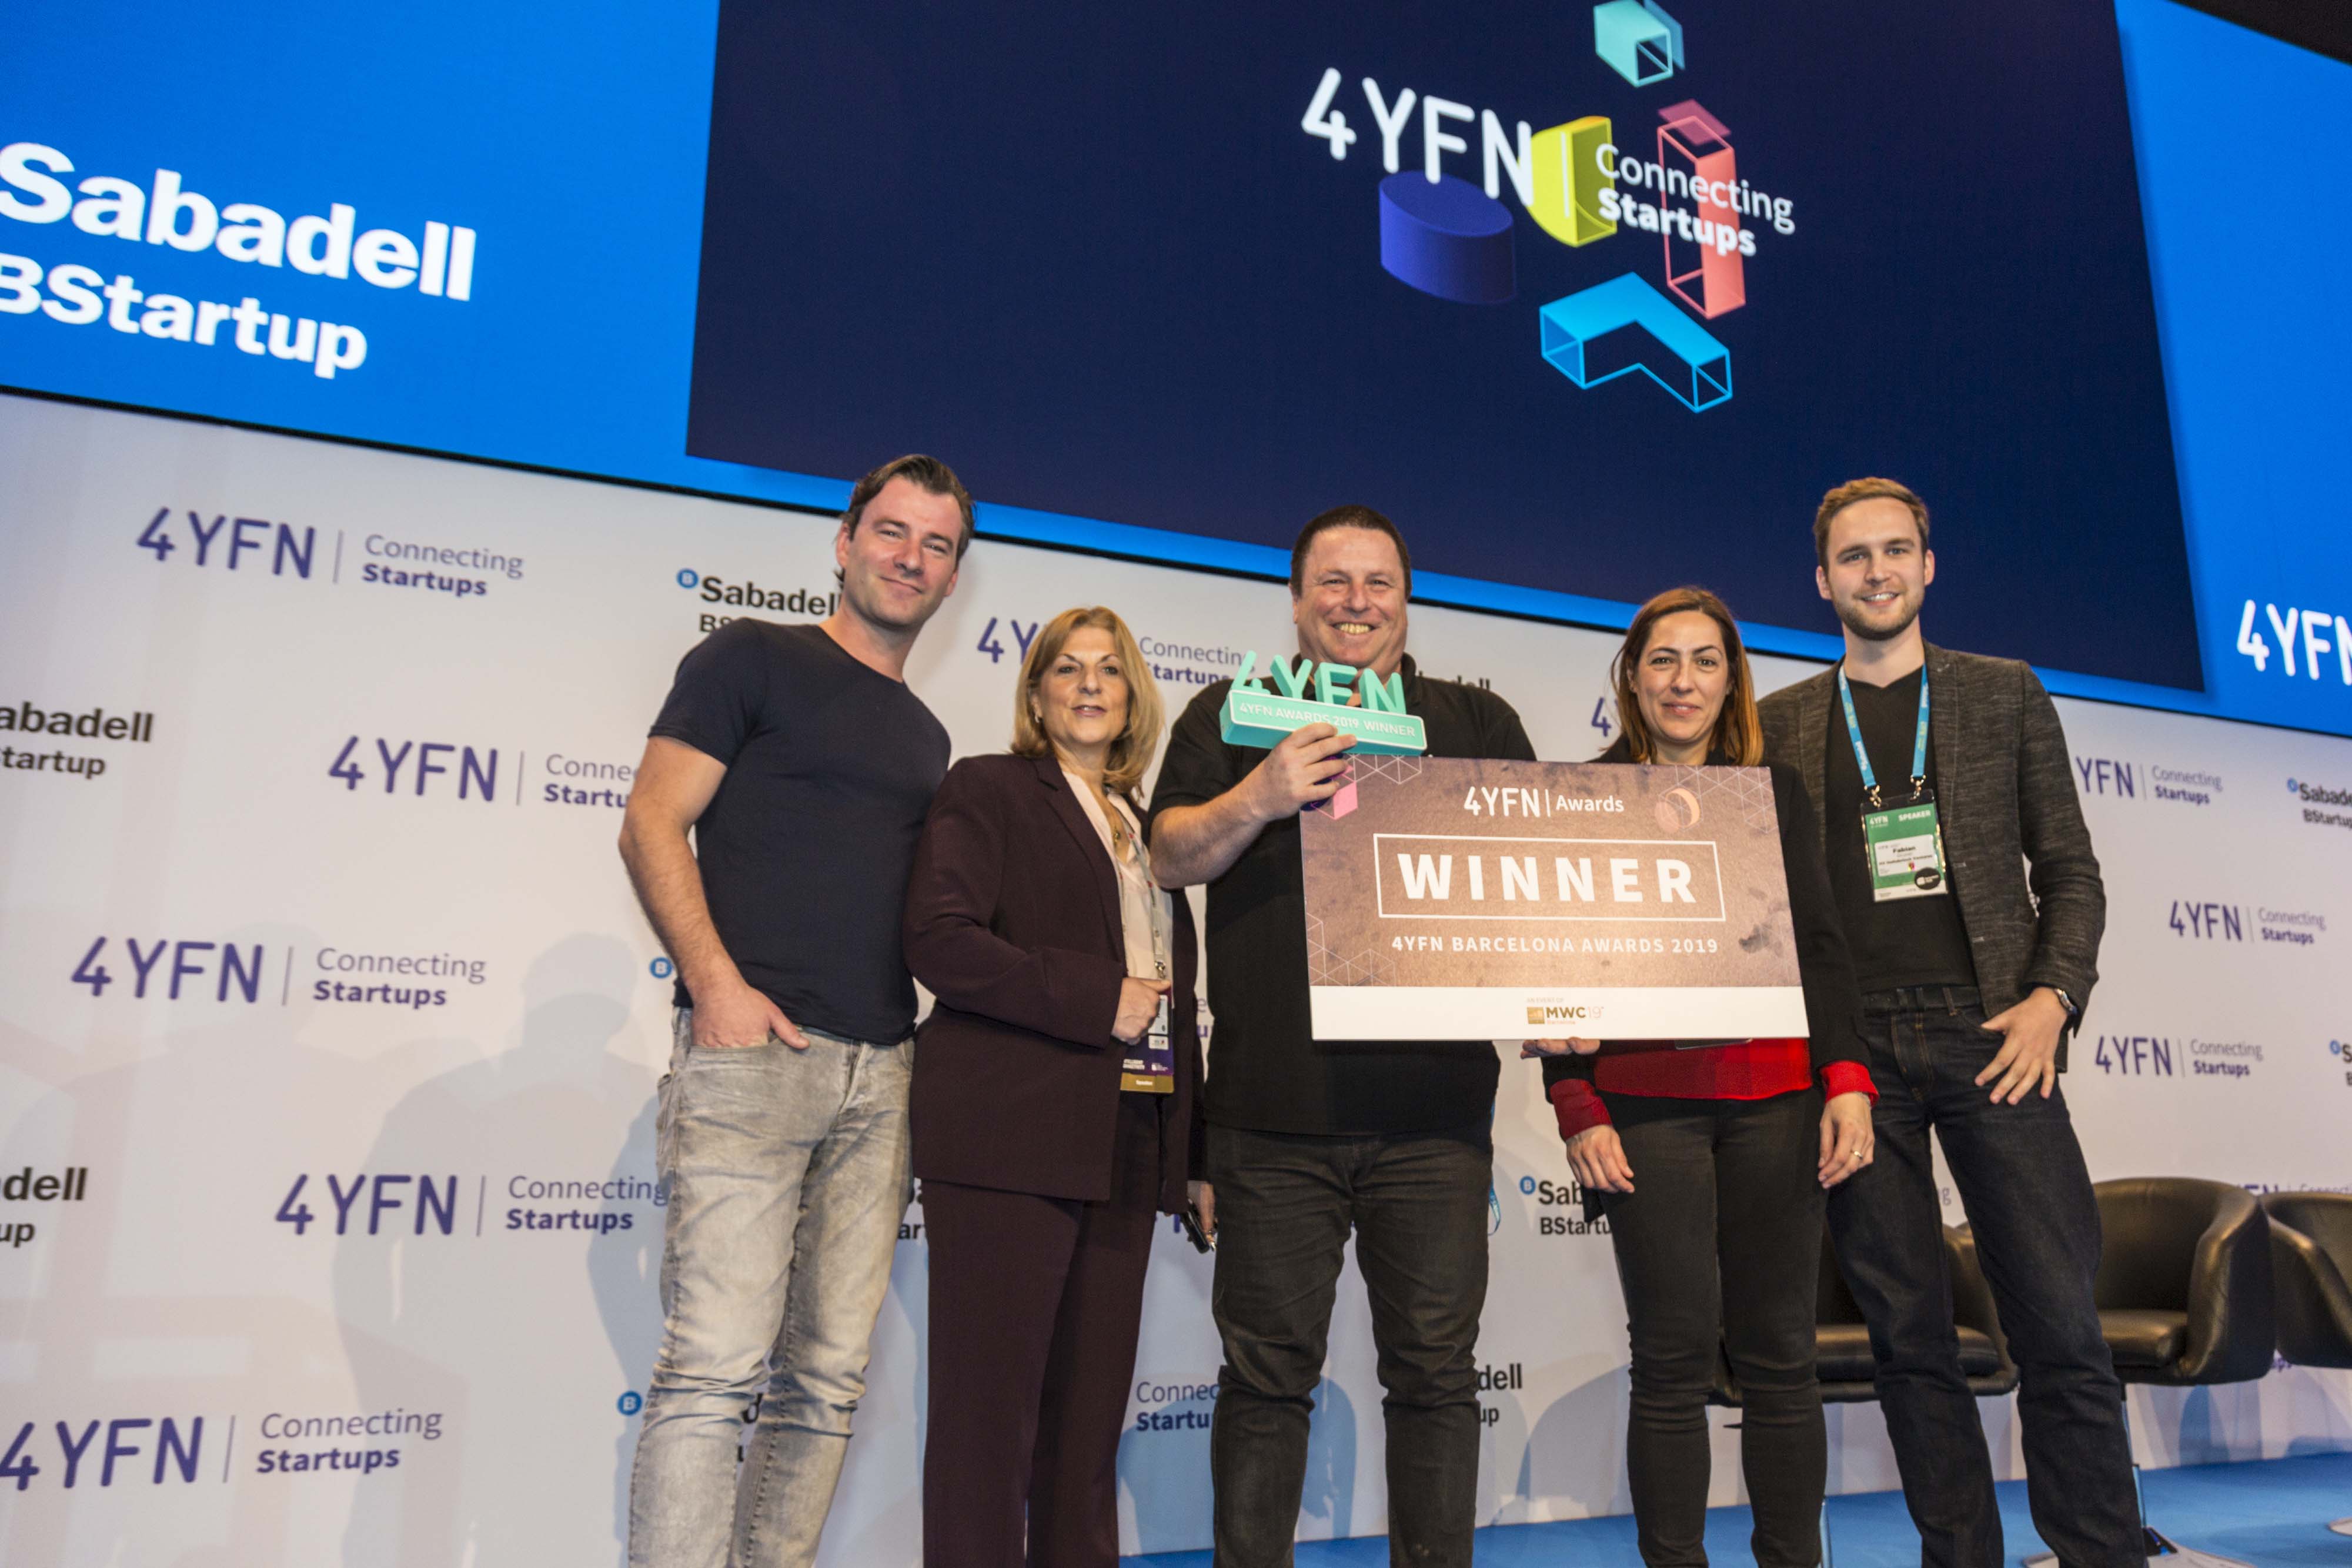 military drone jammer tools , IoT Device Security Startup NanoLock Wins GSMA’s 4YFN Competition